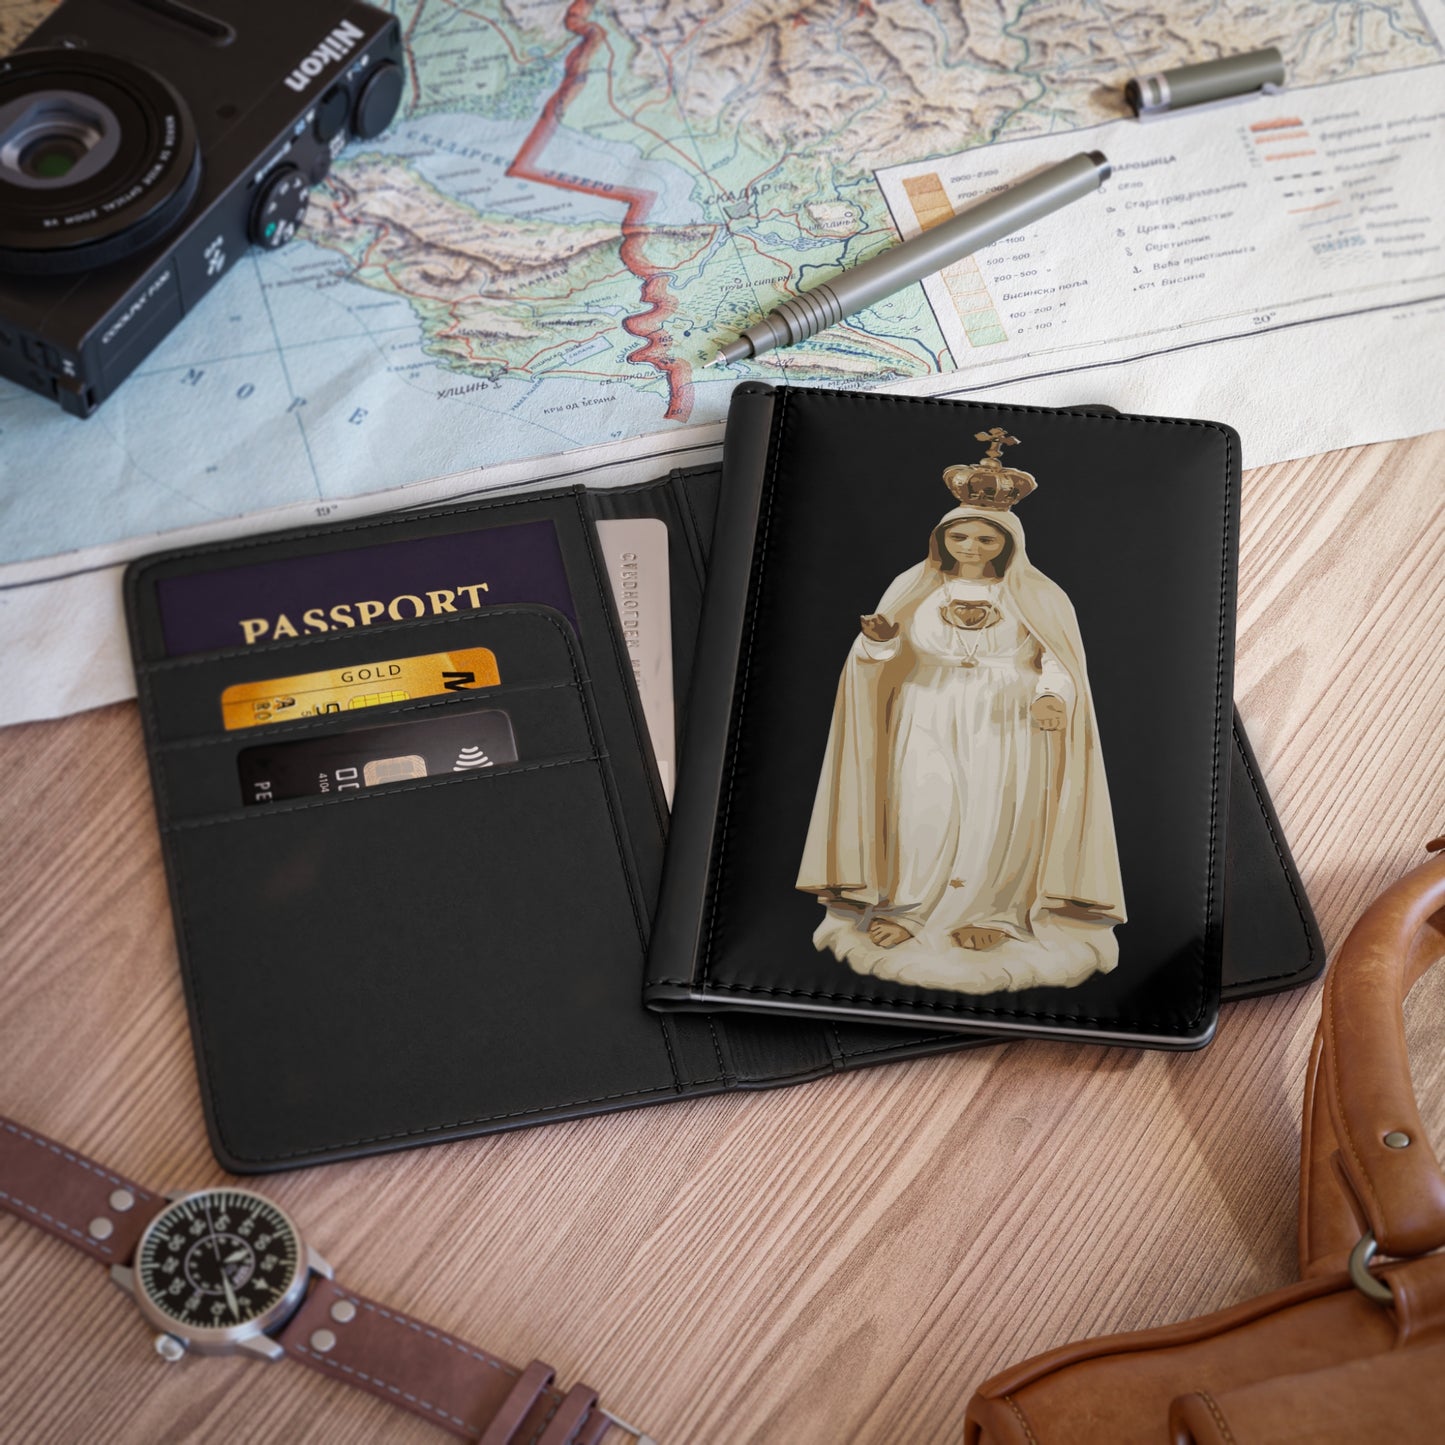 Our Lady of Fatima Passport Cover